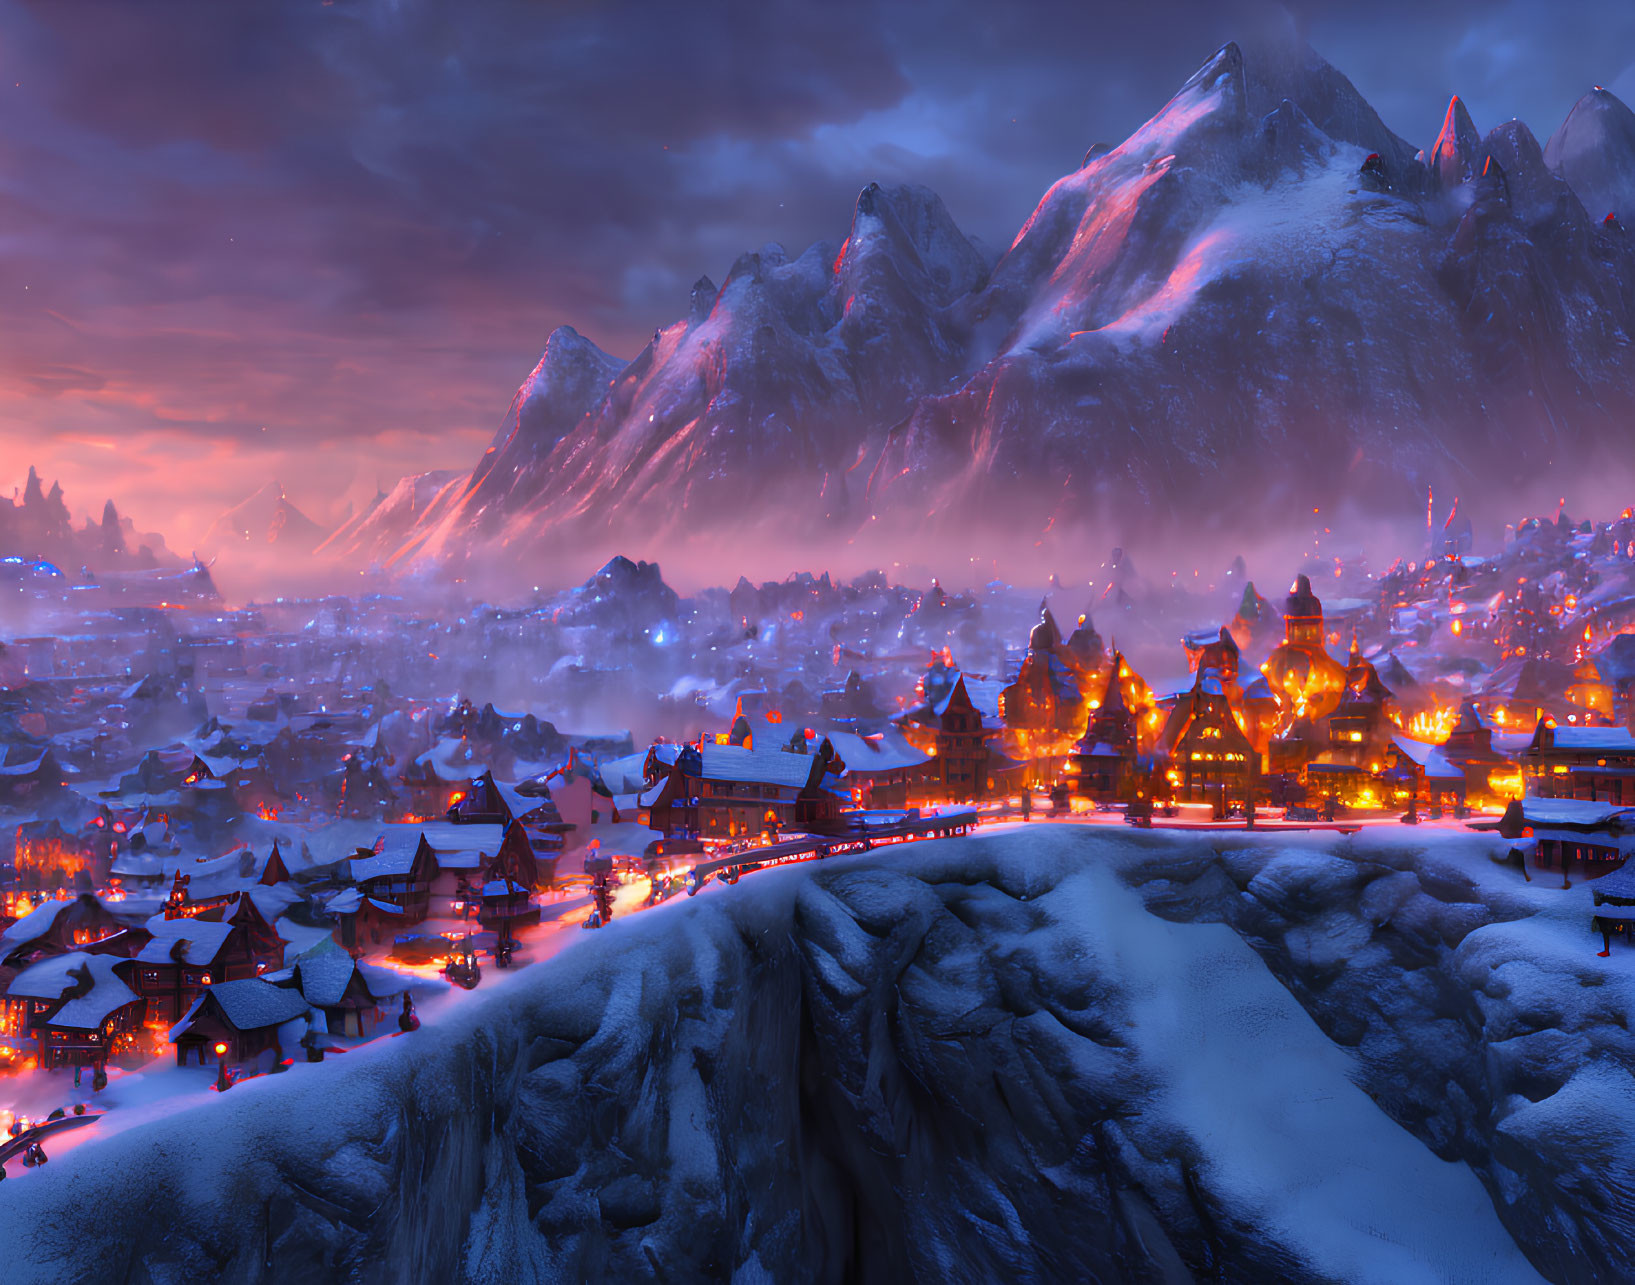 Snow-covered village with warmly lit homes nestled at dusk under vibrant twilight sky